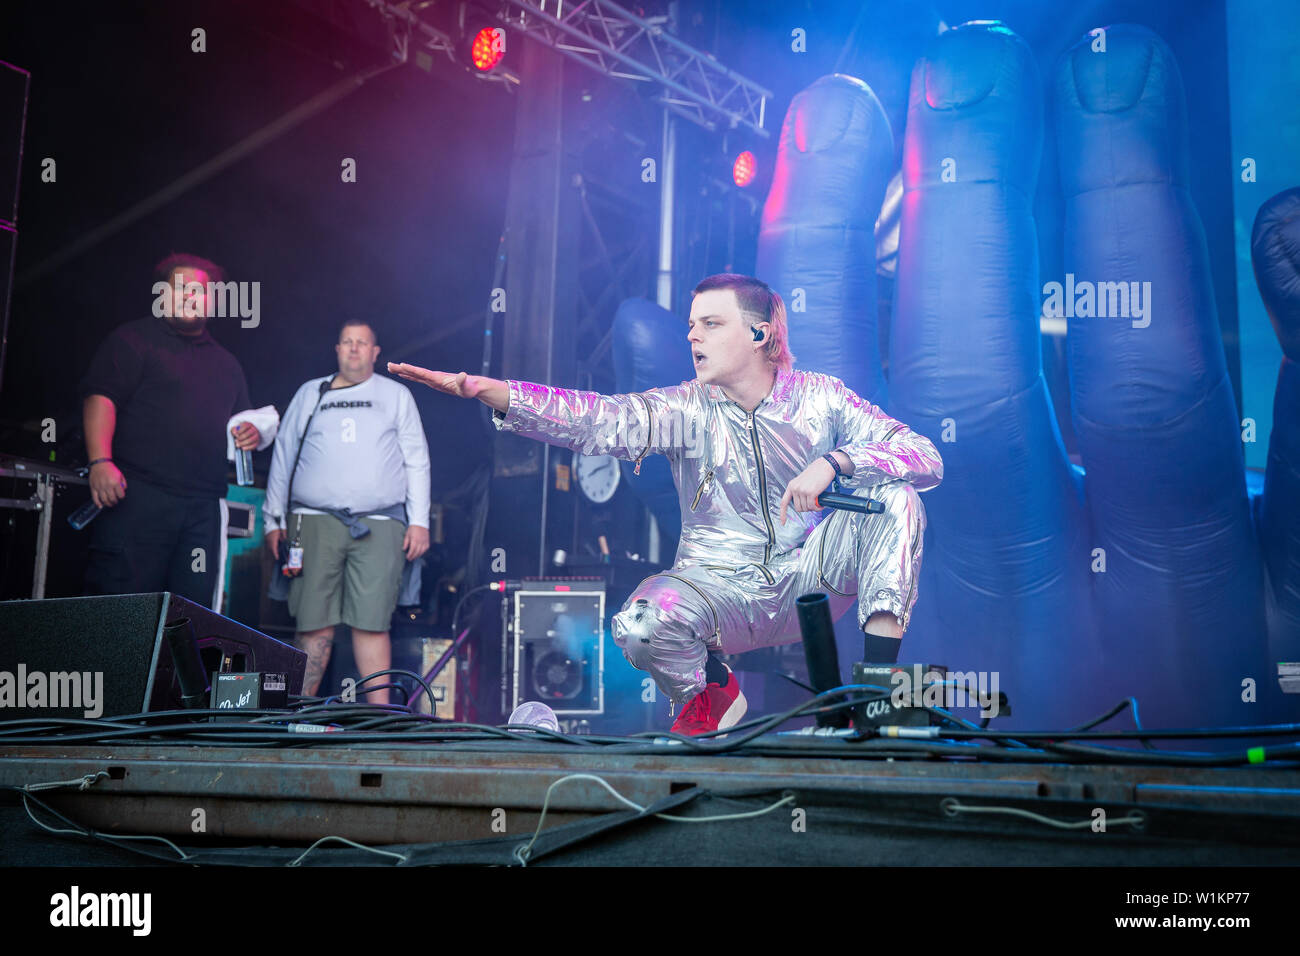 Sandvika, Norway - July 02, 2019.The American rap group Brockhampton performs a live concert during the Norwegian music festival Kardetten 2019 in Sandvika. Here rapper Joba is seen live on stage. (Photo credit: Gonzales Photo - Tord Litleskare). Stock Photo